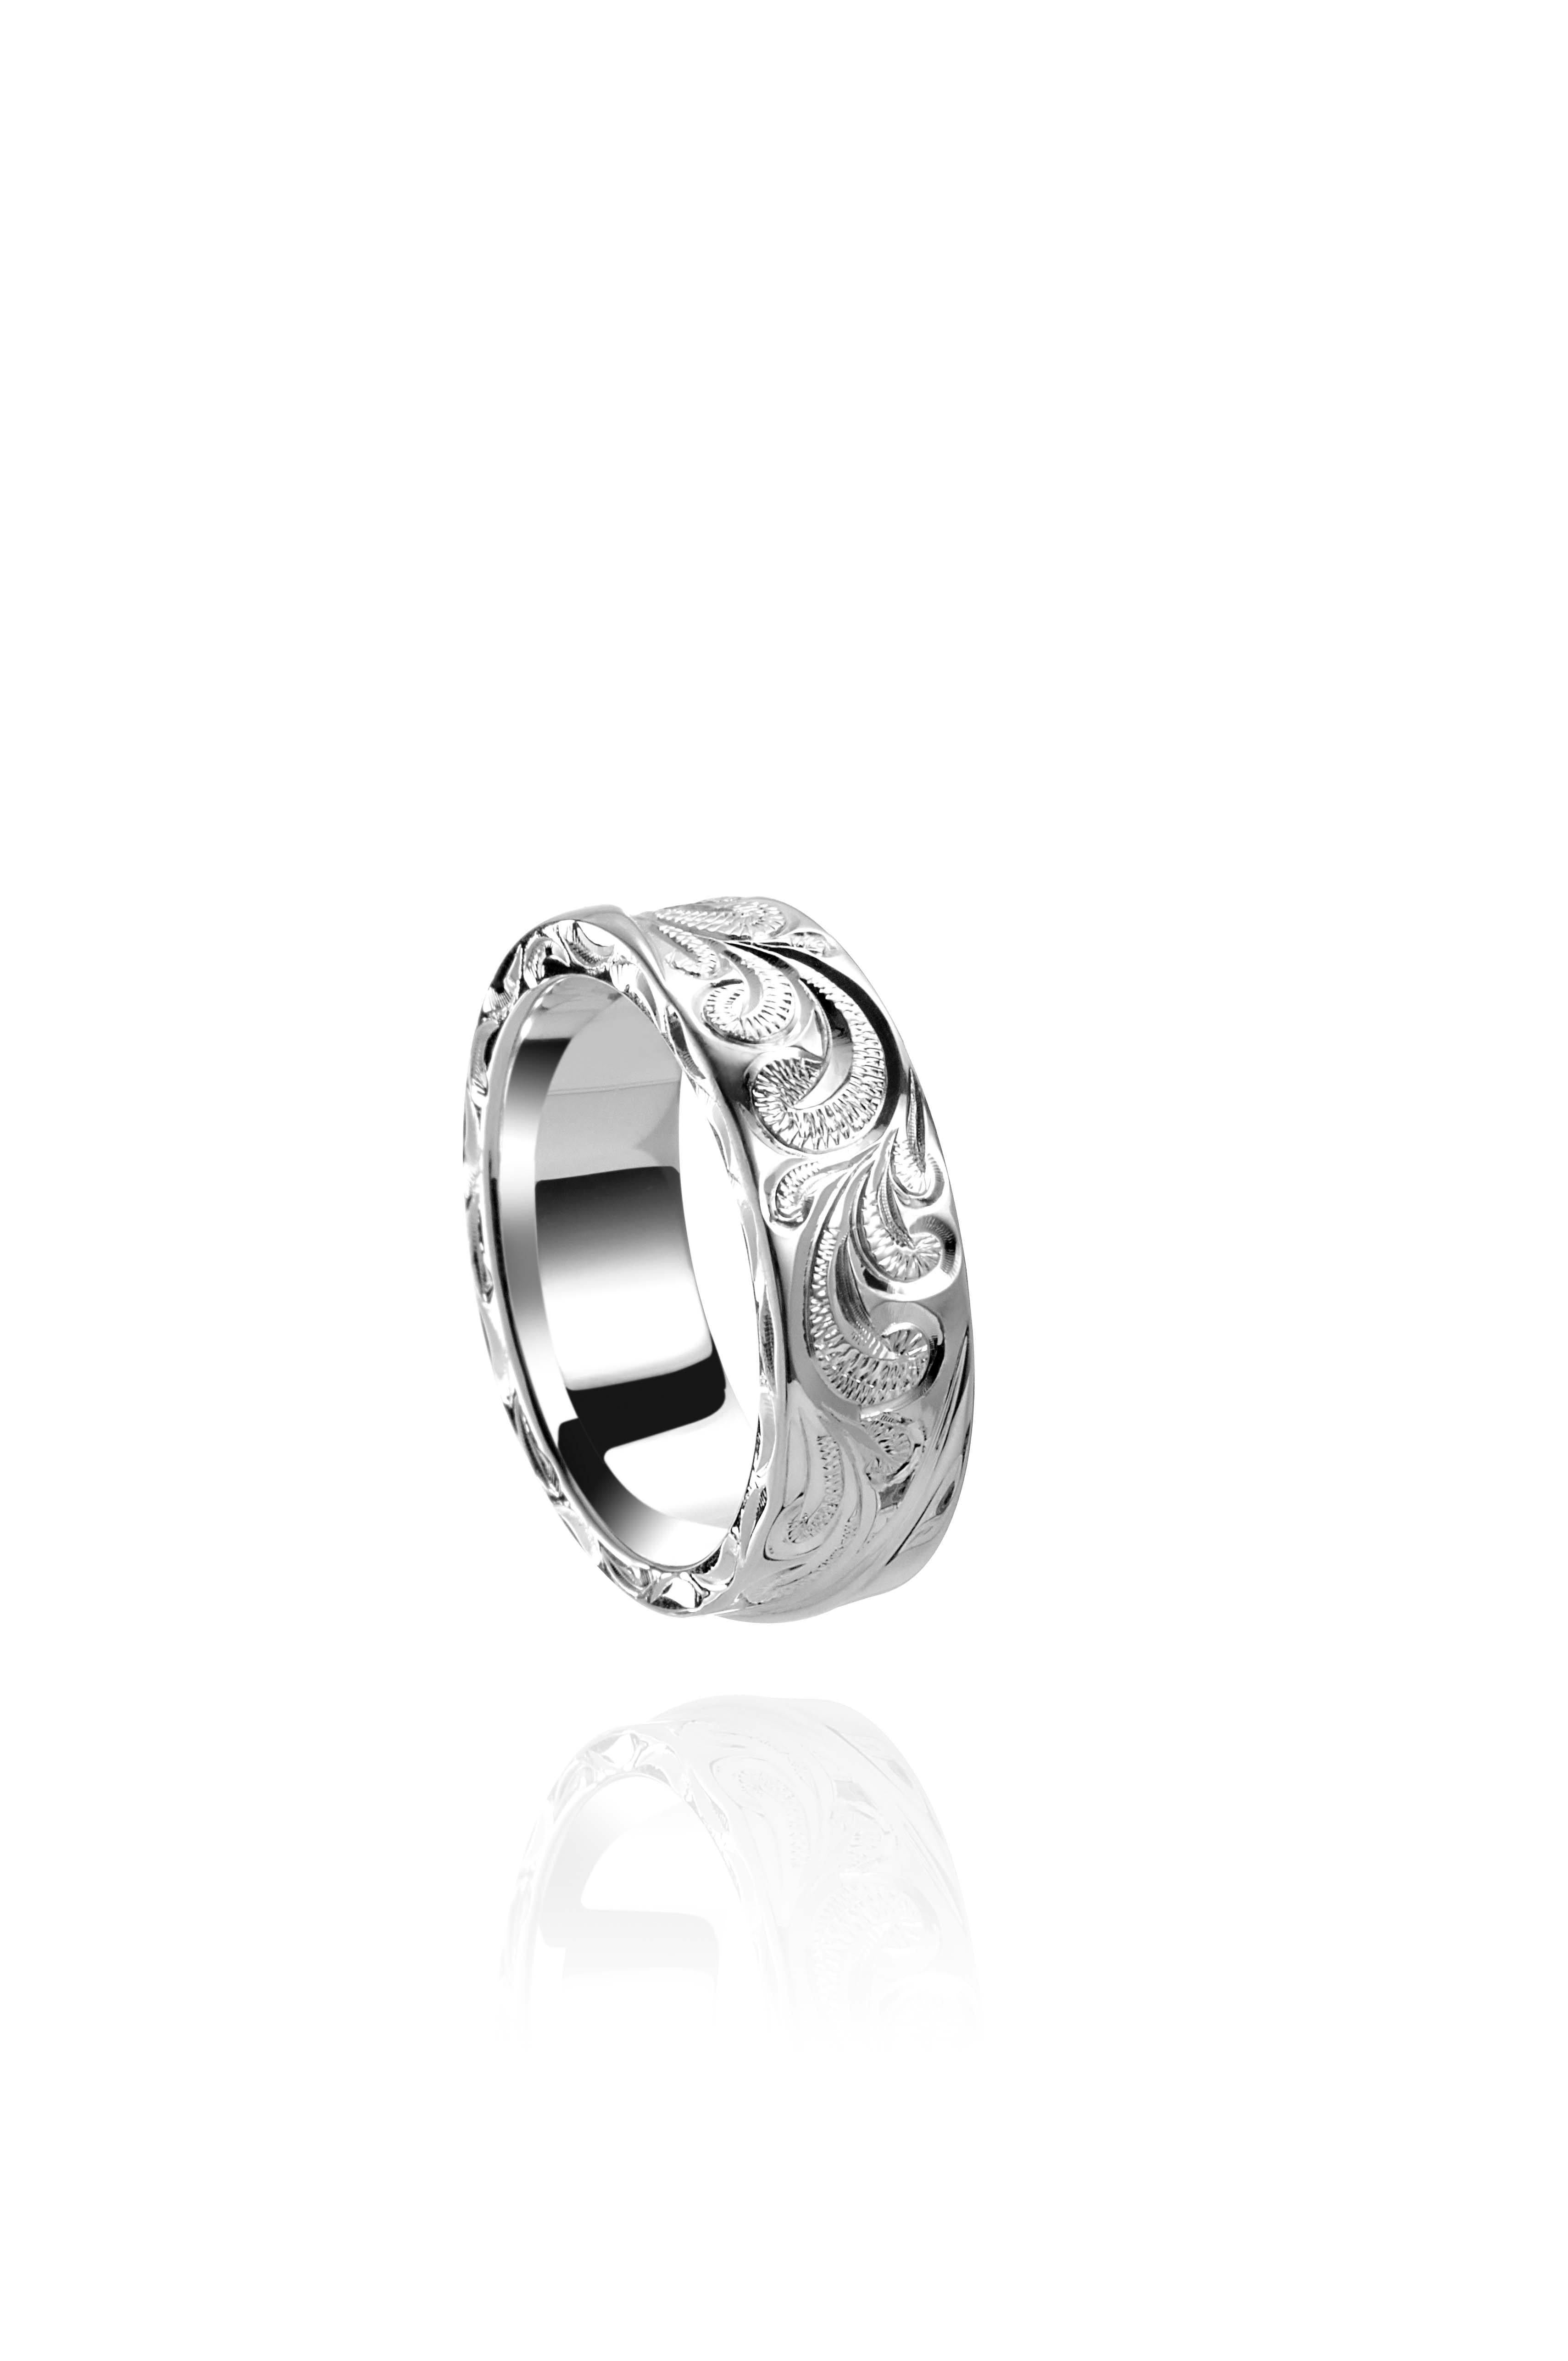 The picture shows a 925 sterling silver wave ring with scroll hand engravings.